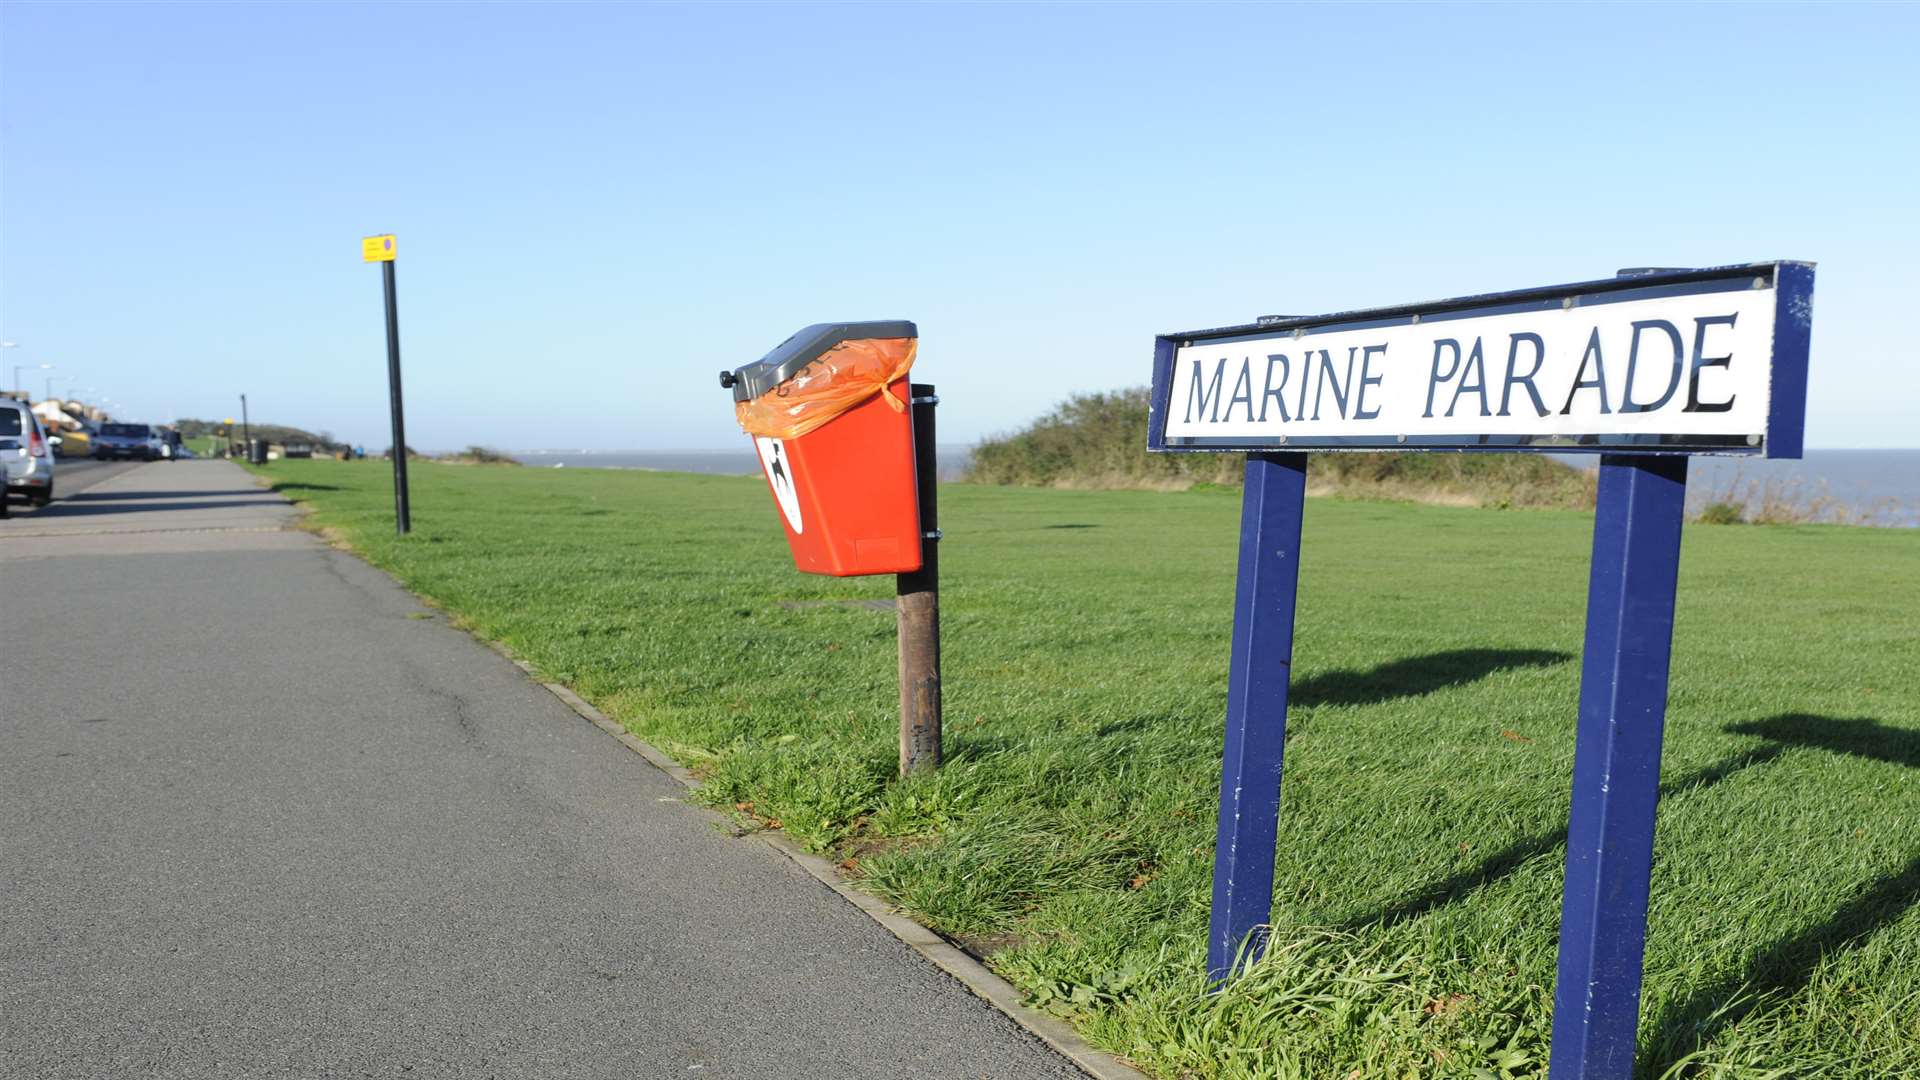 Owners are advised to put their dog poo bags in bins provided